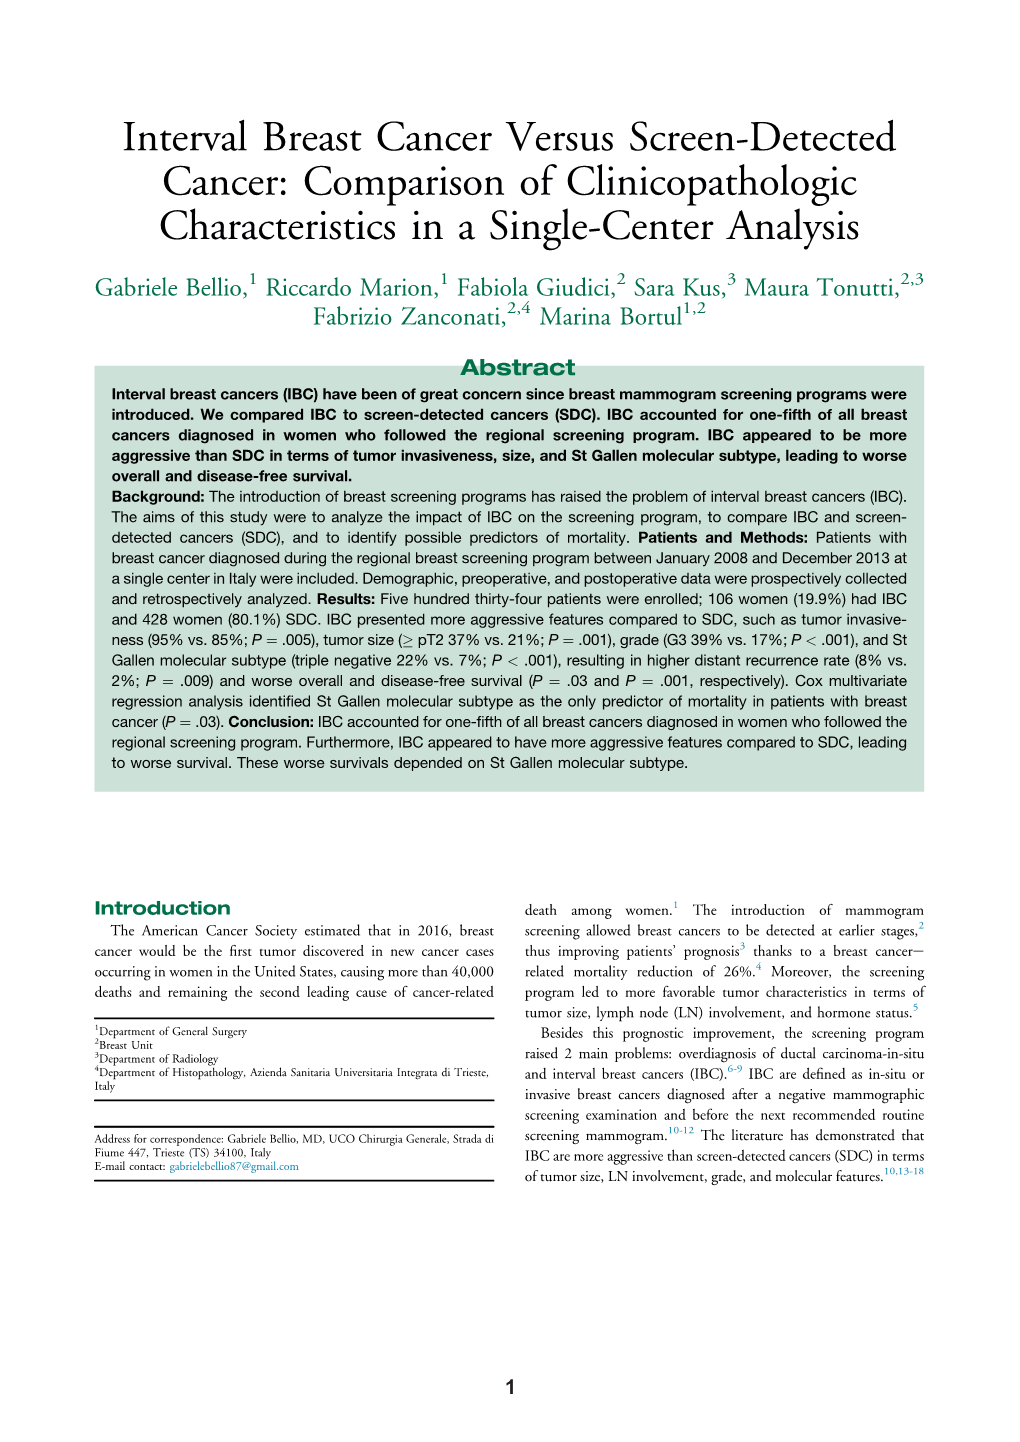 Interval Breast Cancer Versus Screen-Detected Cancer: Comparison of Clinicopathologic Characteristics in a Single-Center Analysis